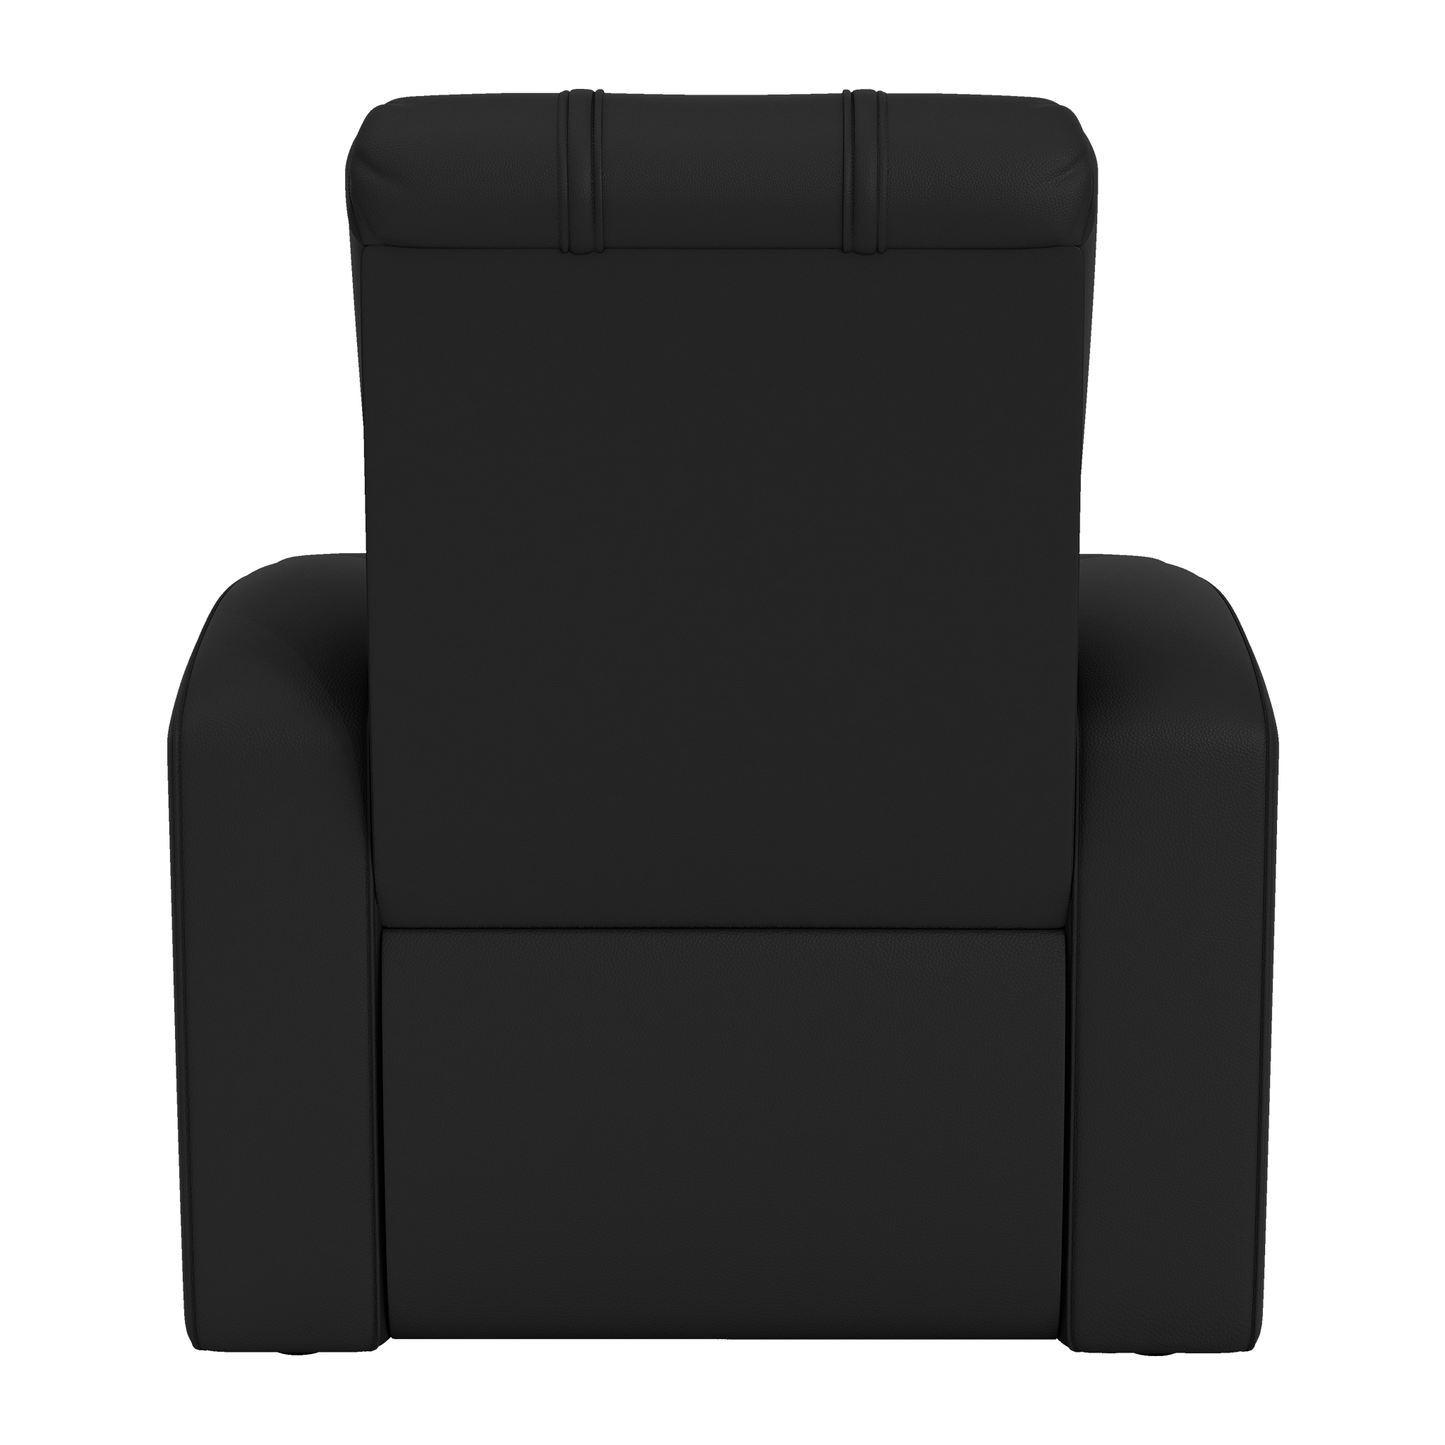 Relax Home Theater Recliner with St Louis Cardinals Cooperstown Primary